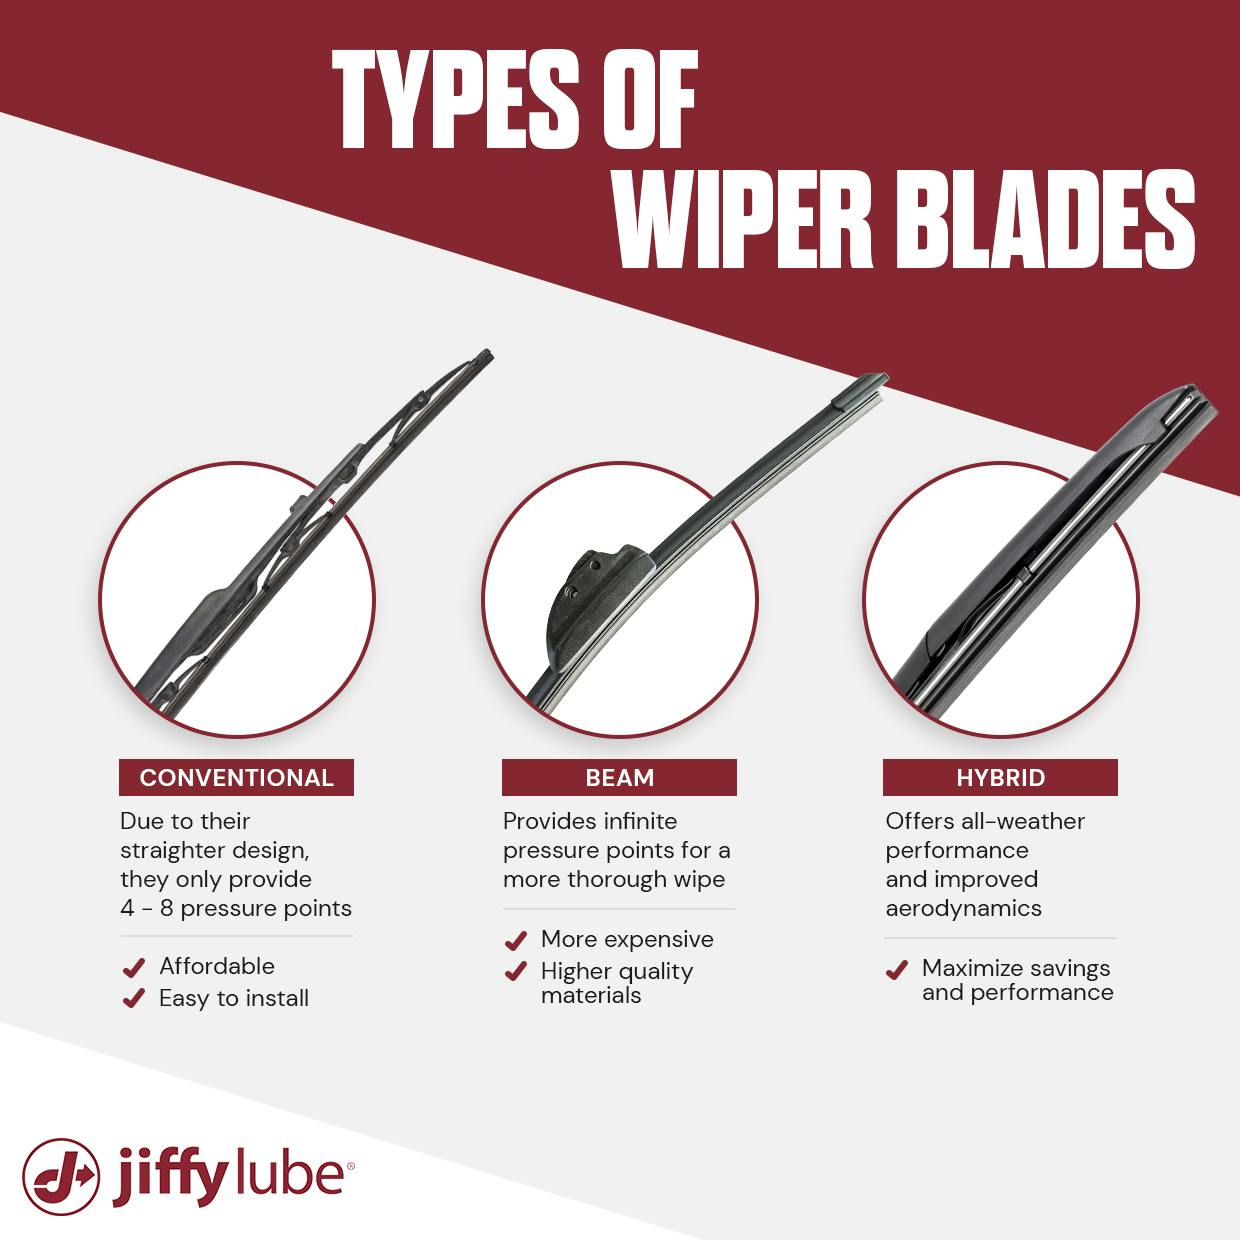 Description of different types of wiper blades